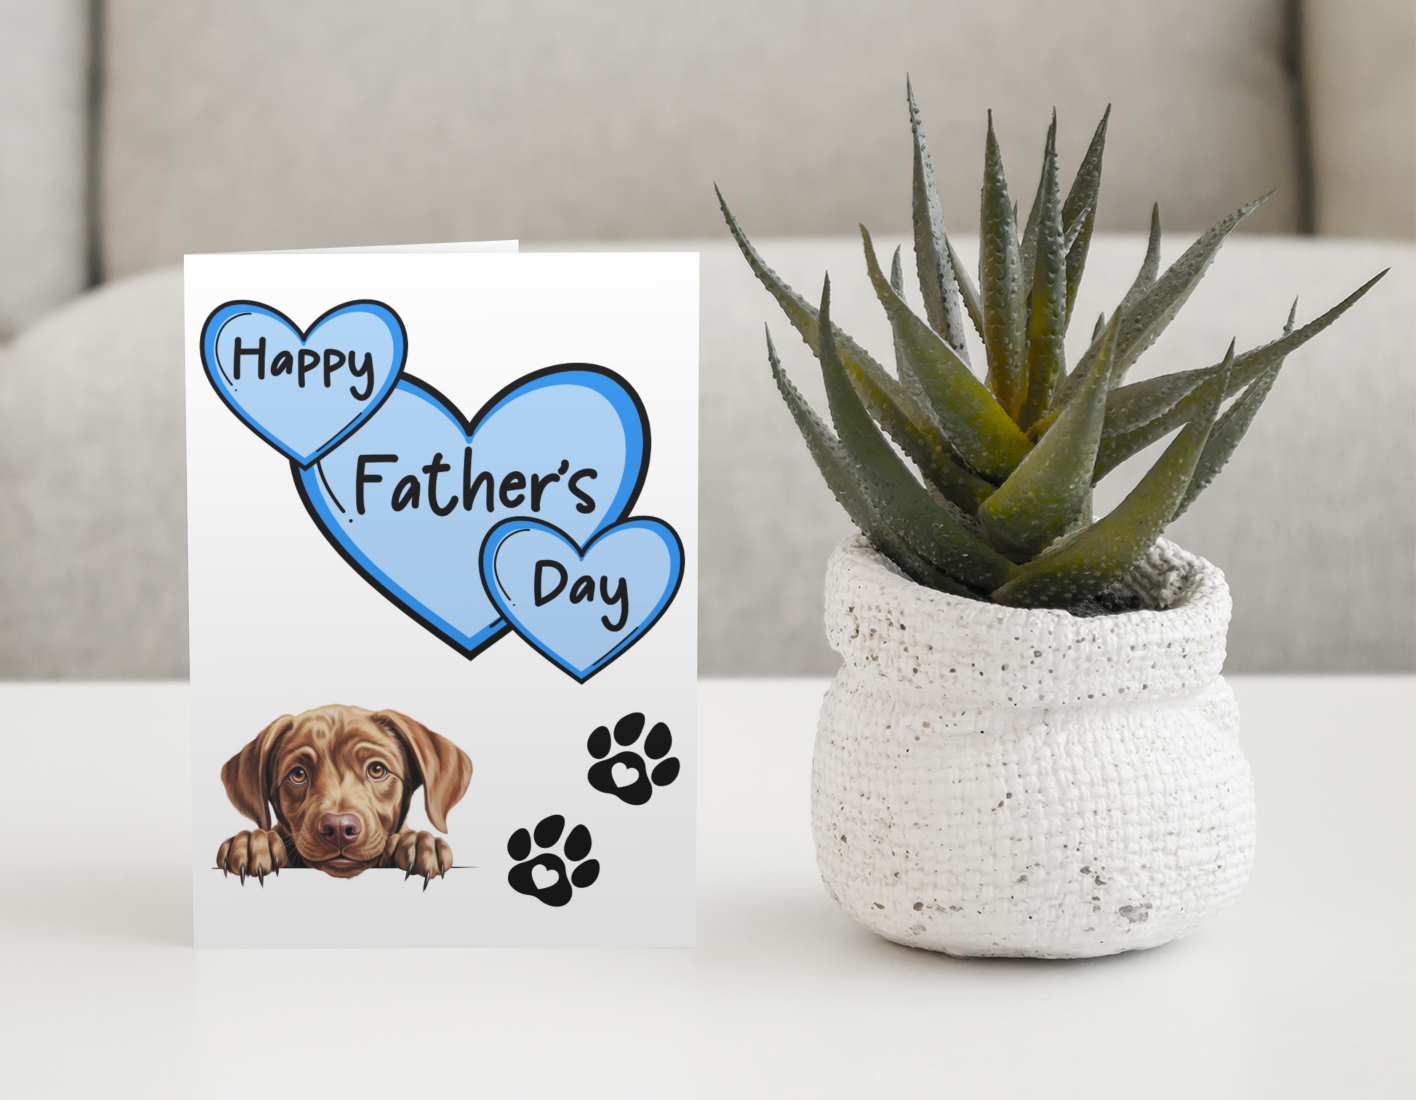 Labrador Retriever Father's Day Card - Nice Cute Fun Pet Dog Puppy Owner Novelty Greeting Card